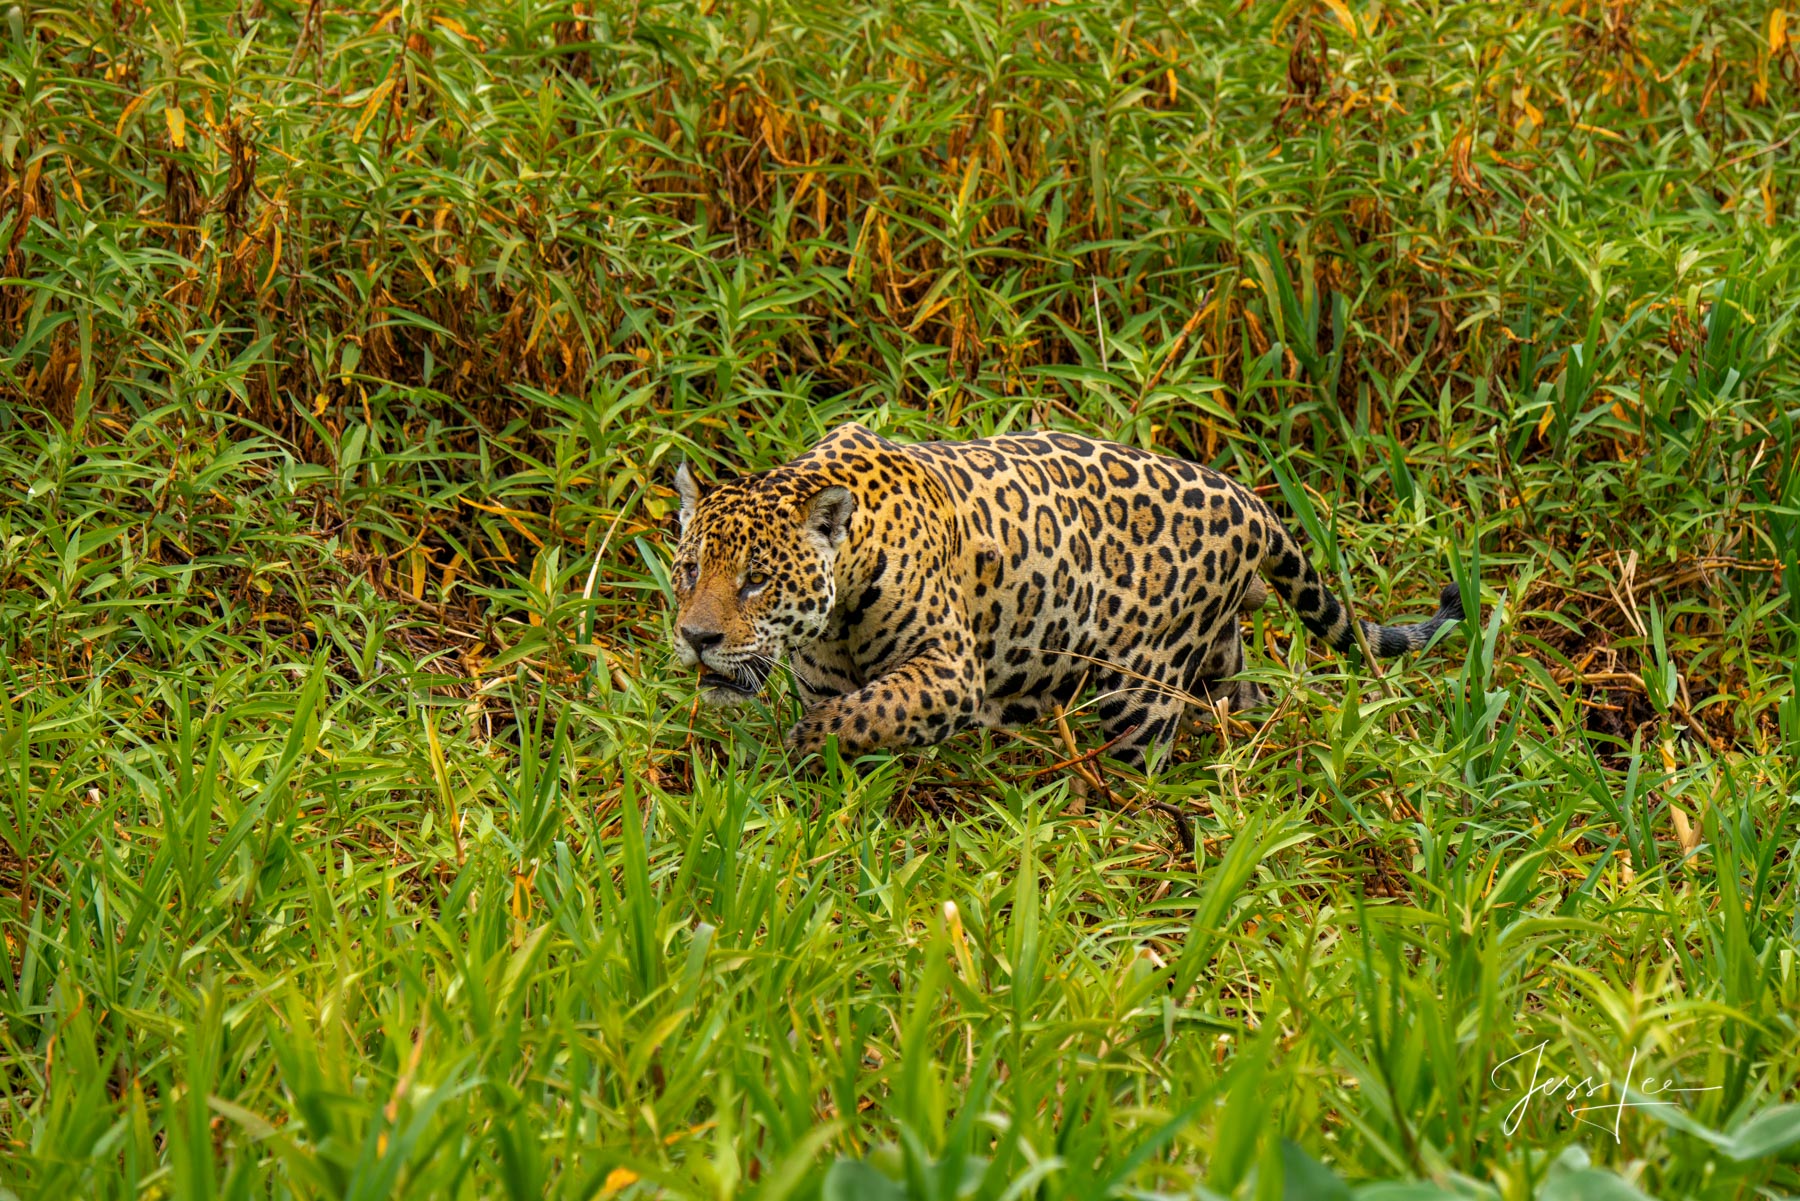 Fine art Jaguar ready to pounce print limited edition of 300 luxury prints by Jess Lee. All photographs copyright © Jess Lee